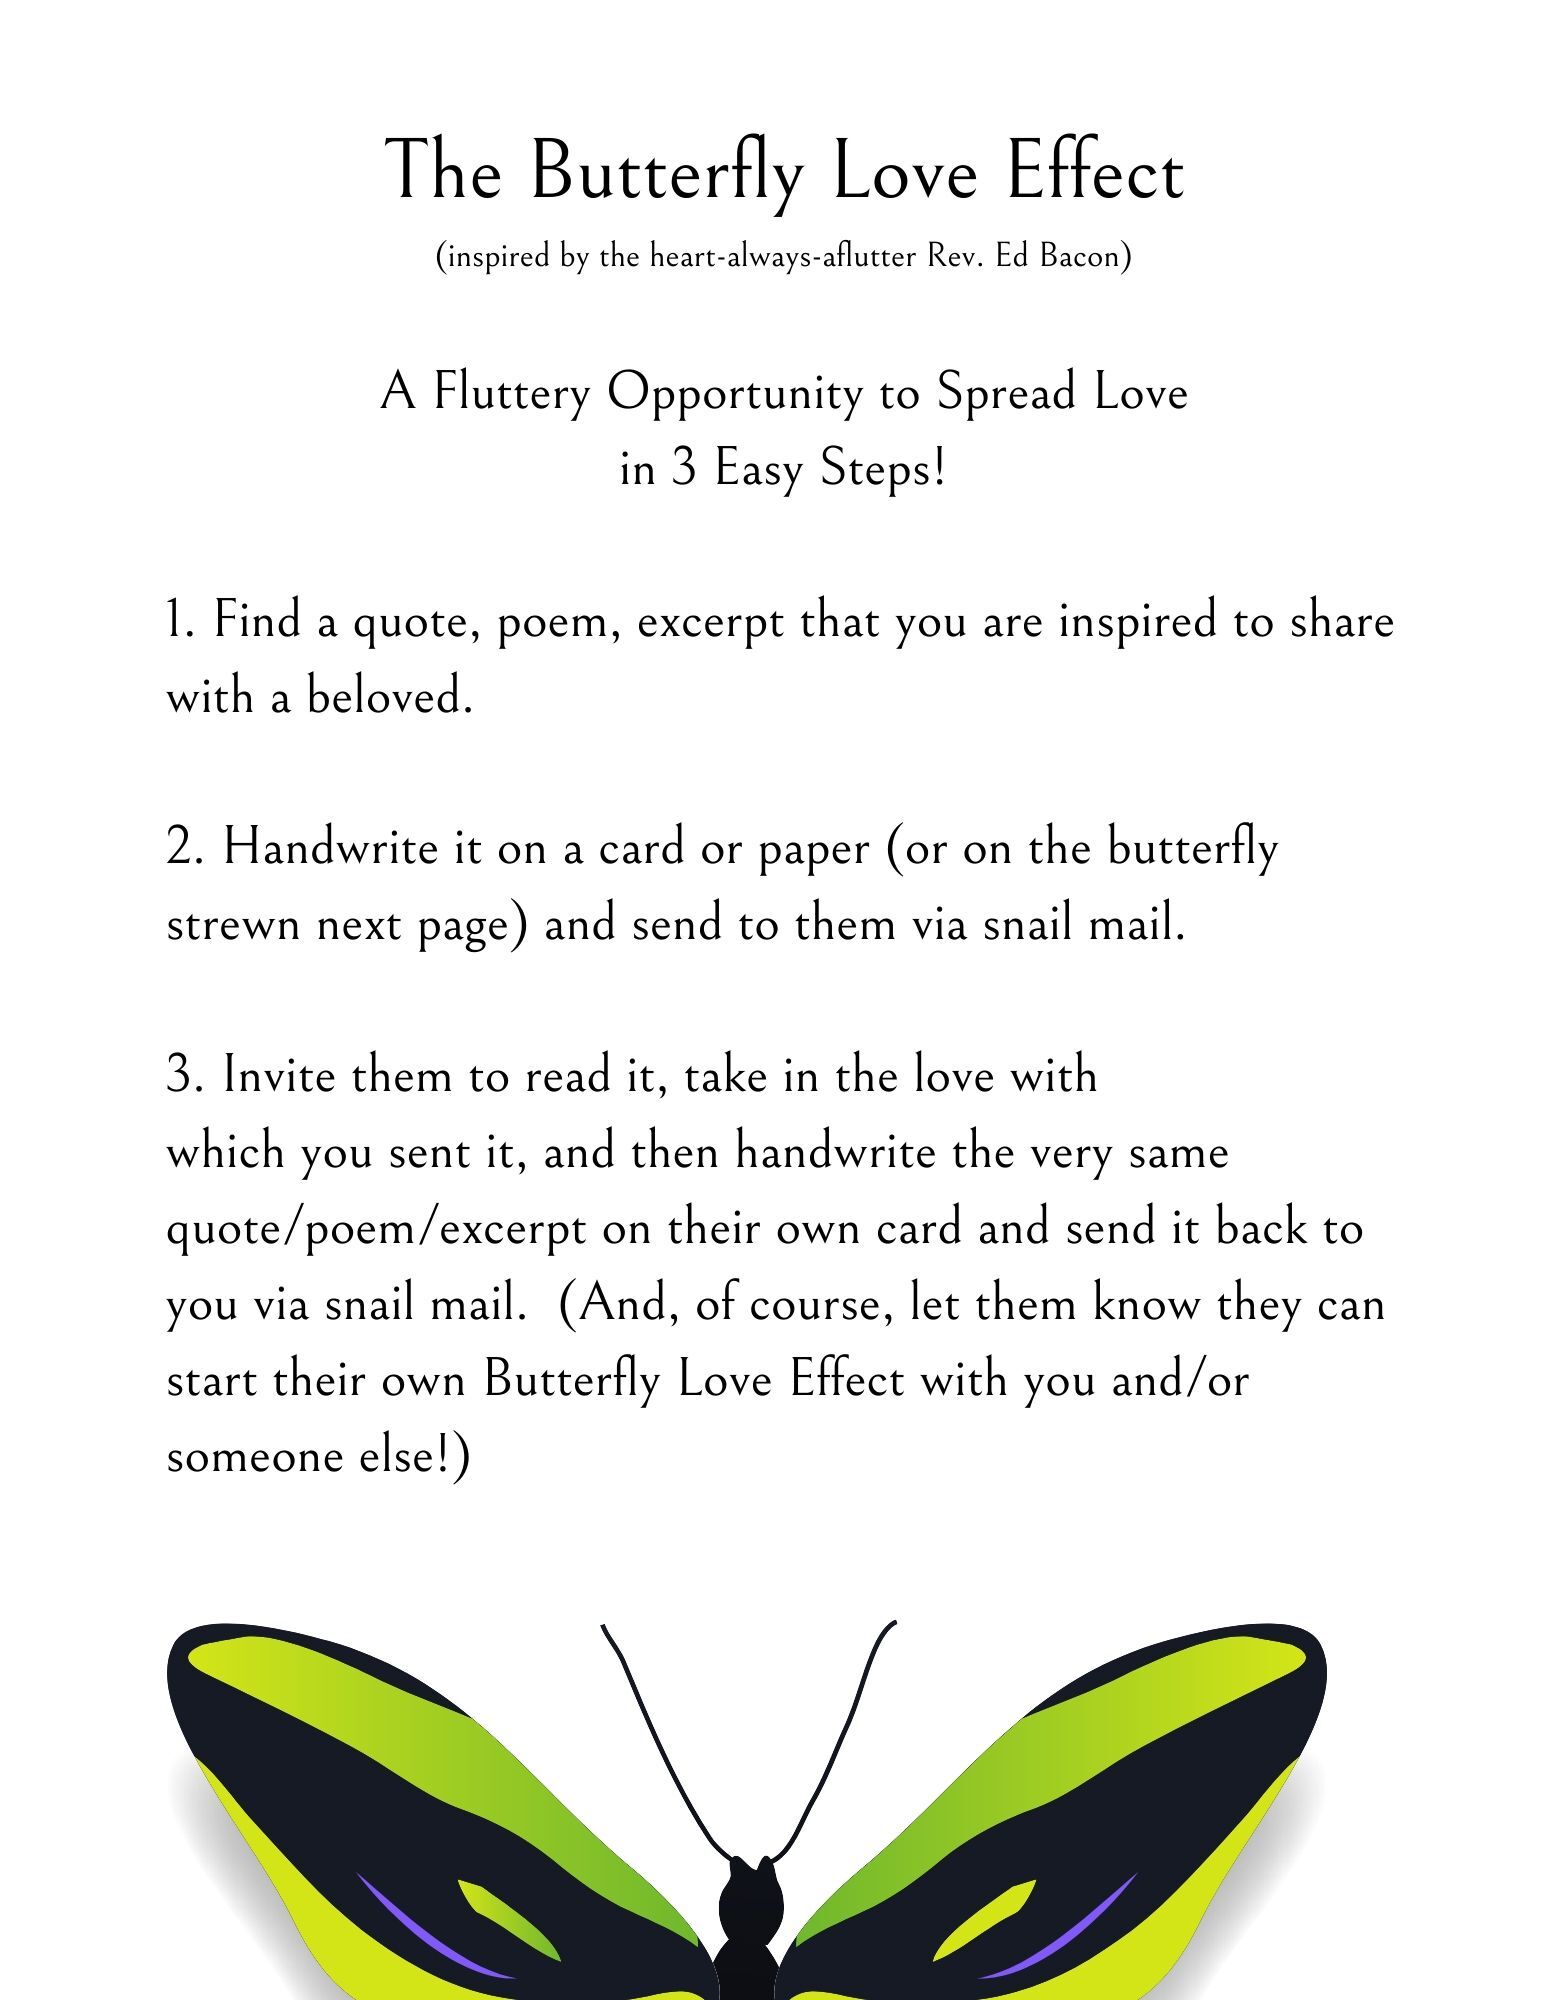 The_Butterfly_Love_Effect_Instructions.jpg